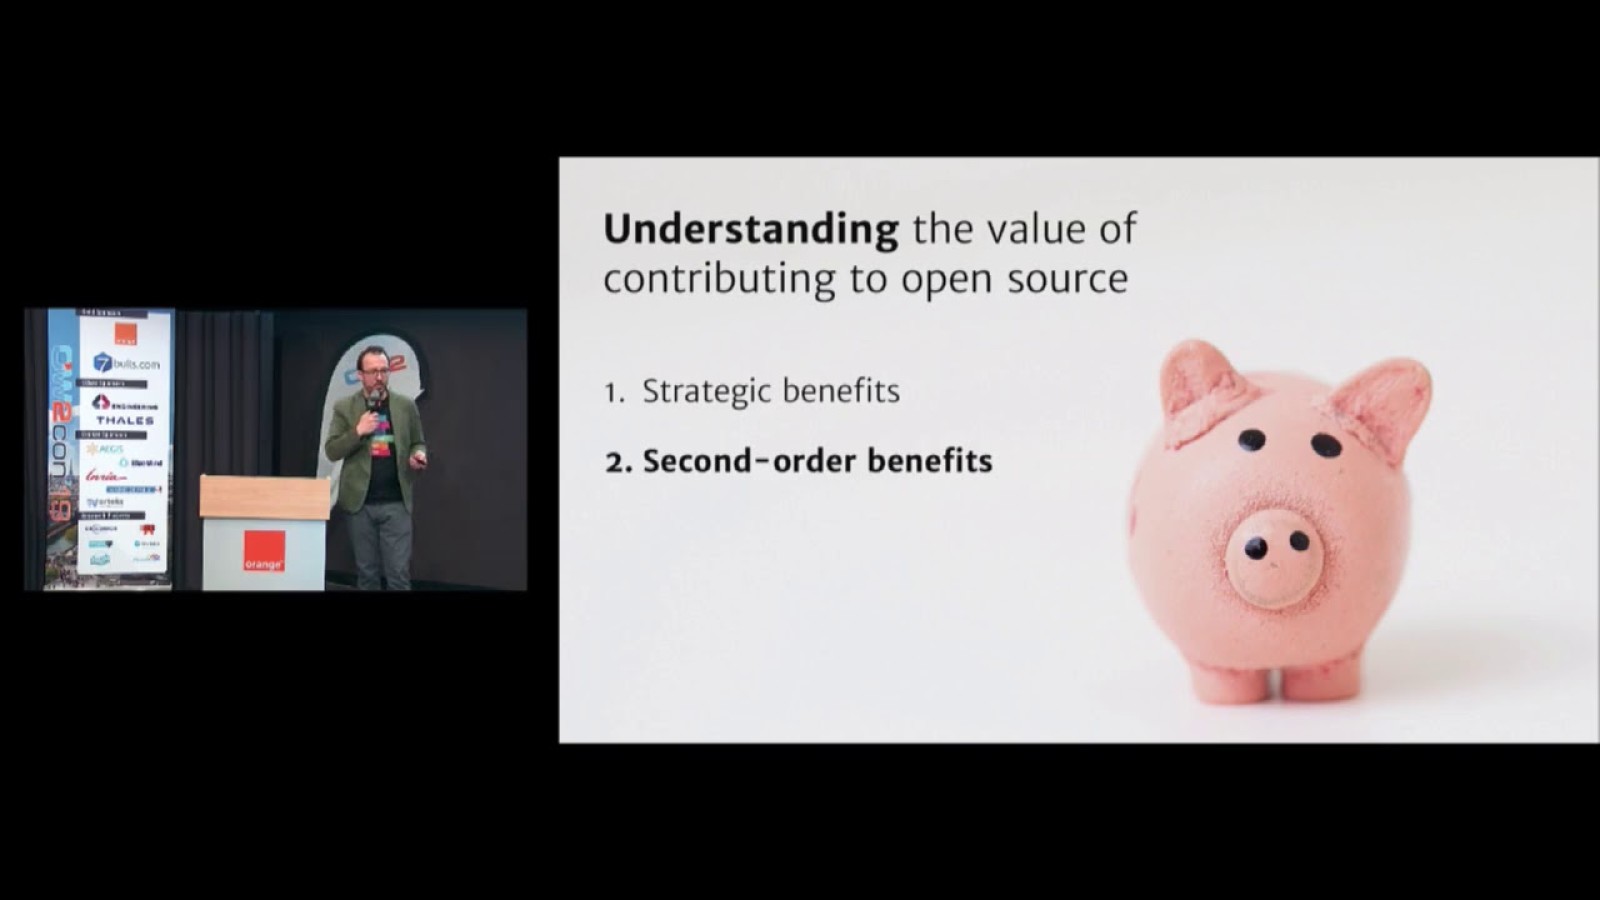 Making the Business Case for Contributing to Open Source